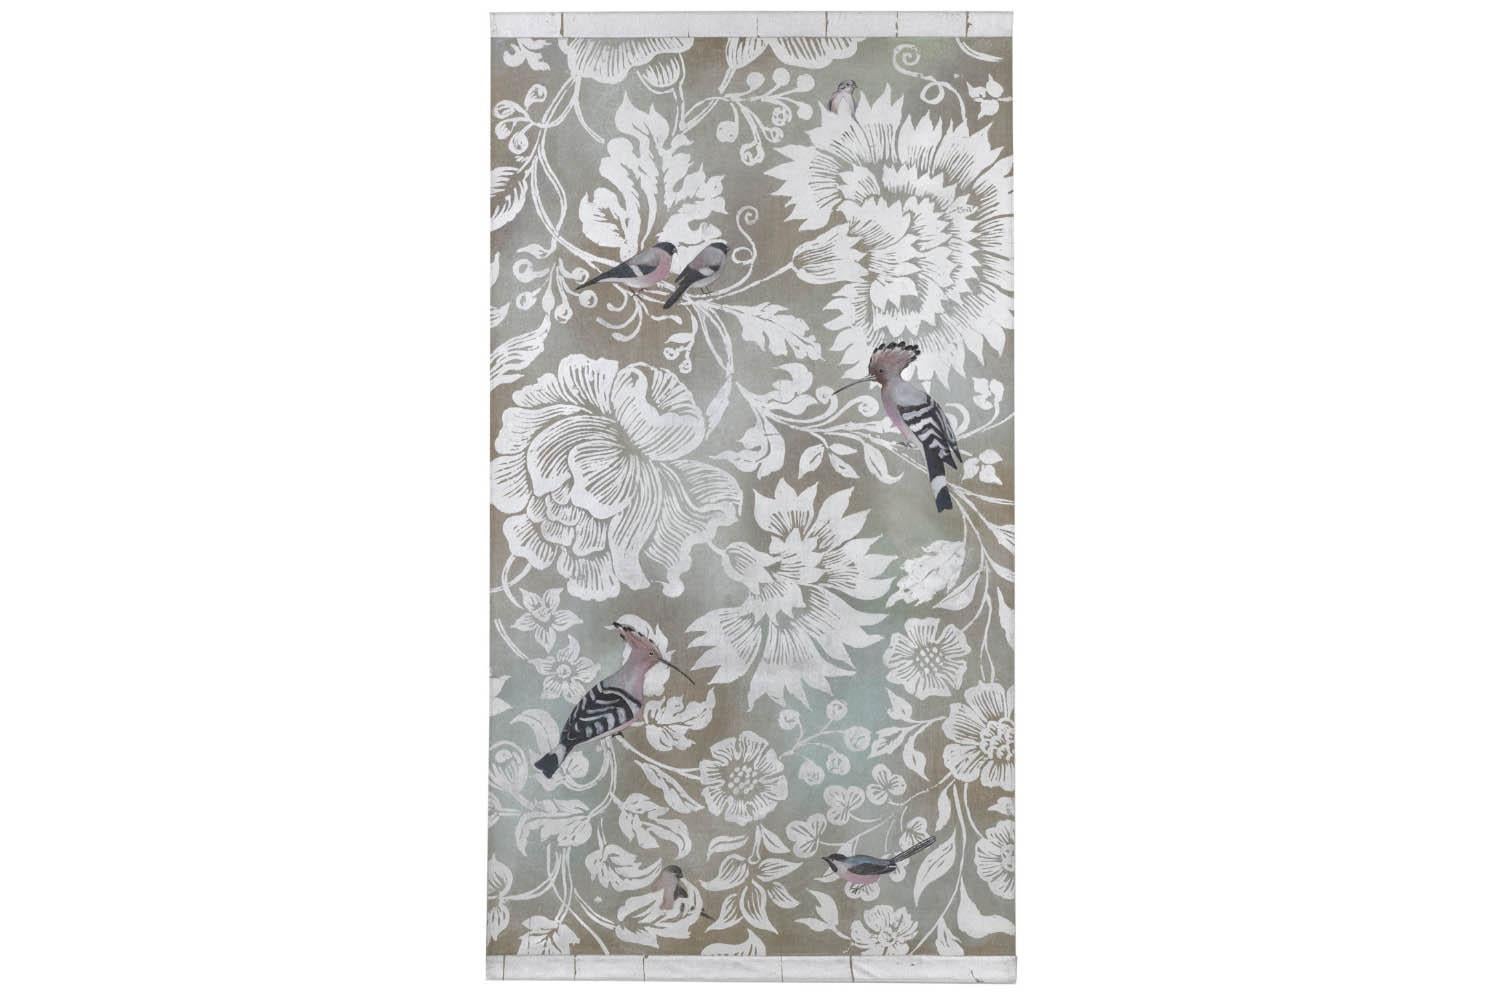 Painted canvas figuring birds : bullfinches and hoopoes, in the middle of large foliage and flowery silvered scrolls. Brown background.

Linen raw canvas hand painted with natural pigments and background silvered with silver leaf. Canvas stretched